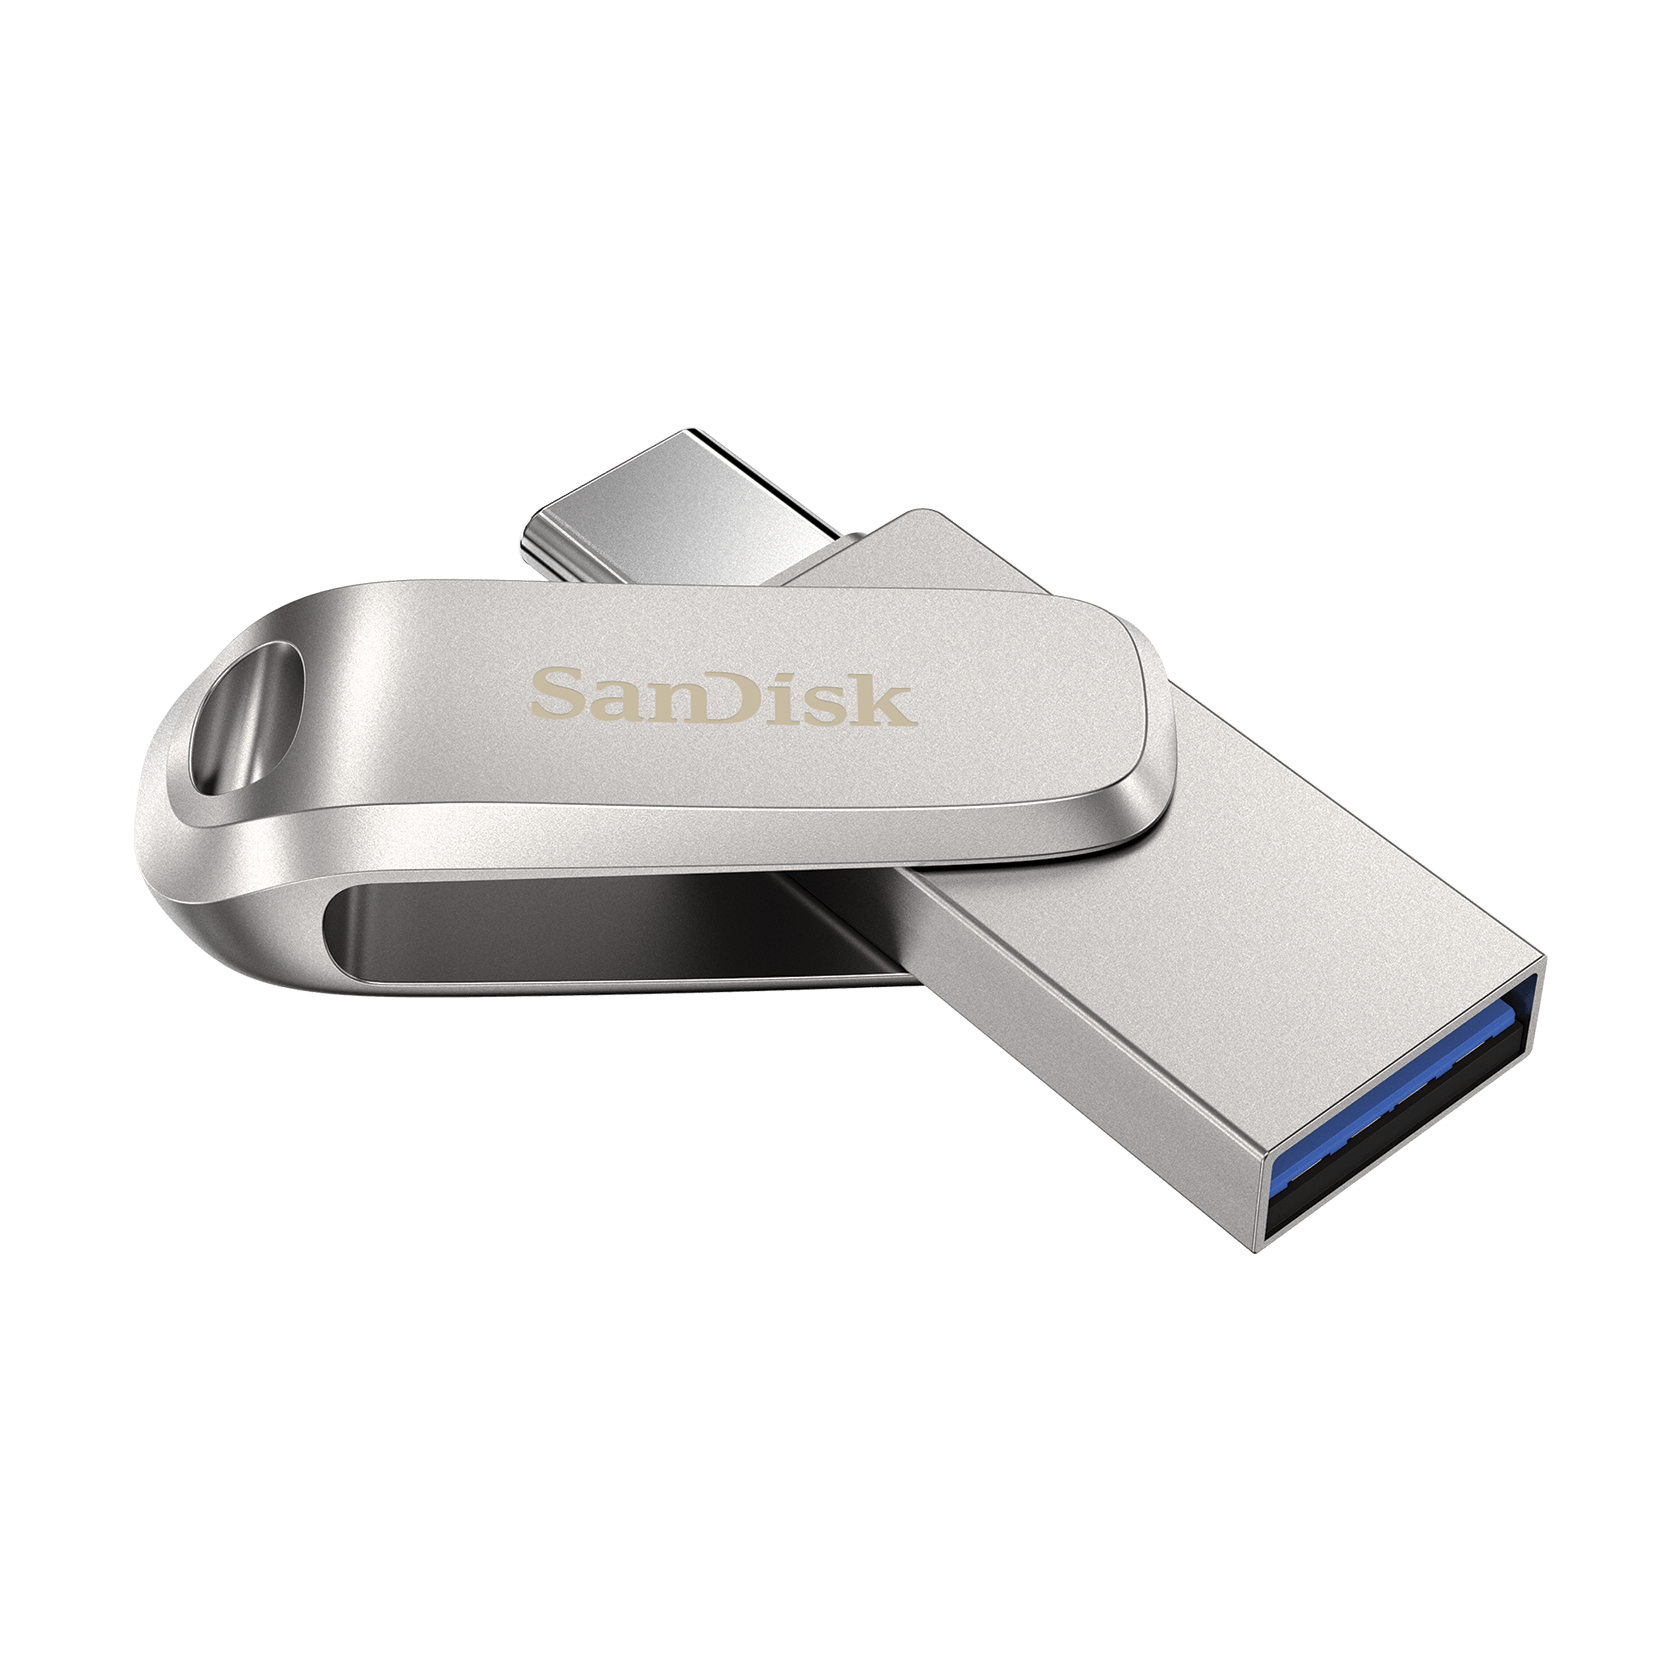 SanDisk 256GB Ultra Dual Drive Luxe USB Type-C Flash Drive - SDDDC4-256G-G46 - image 2 of 8